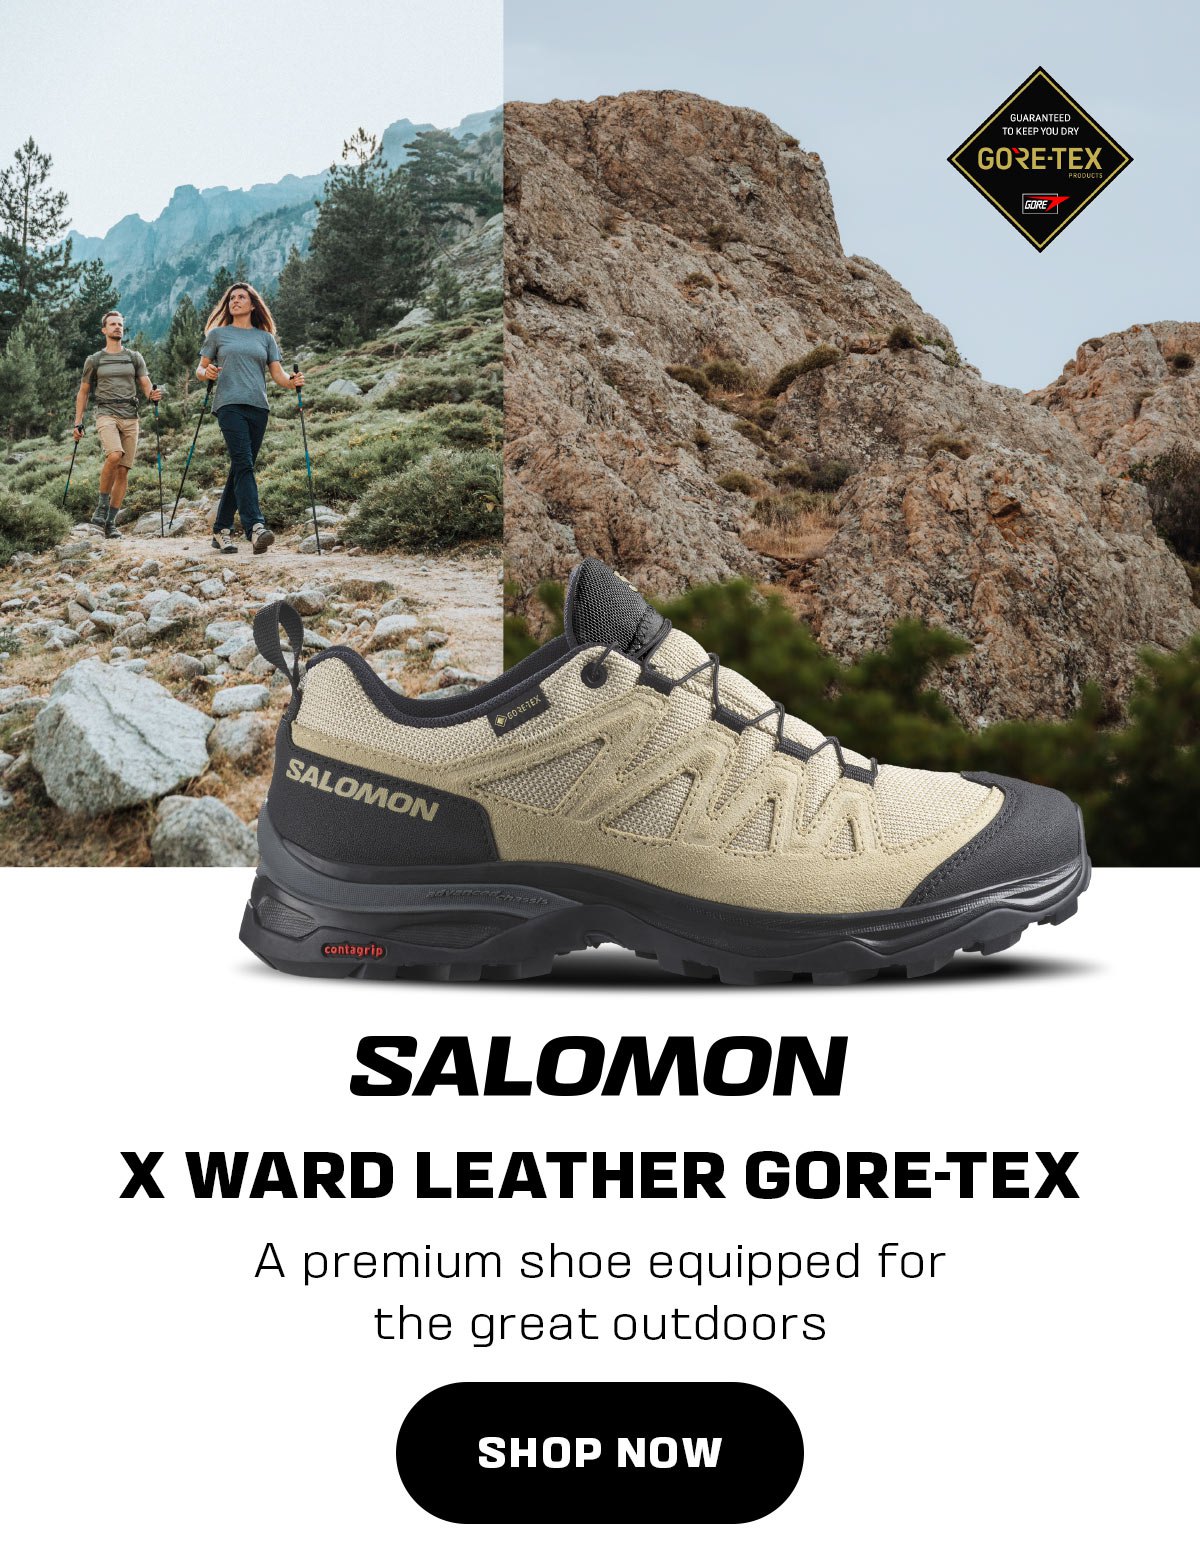  SALOMON X WARD LEATHER GORE-TEX A premium shoe equipped for the great outdoors 